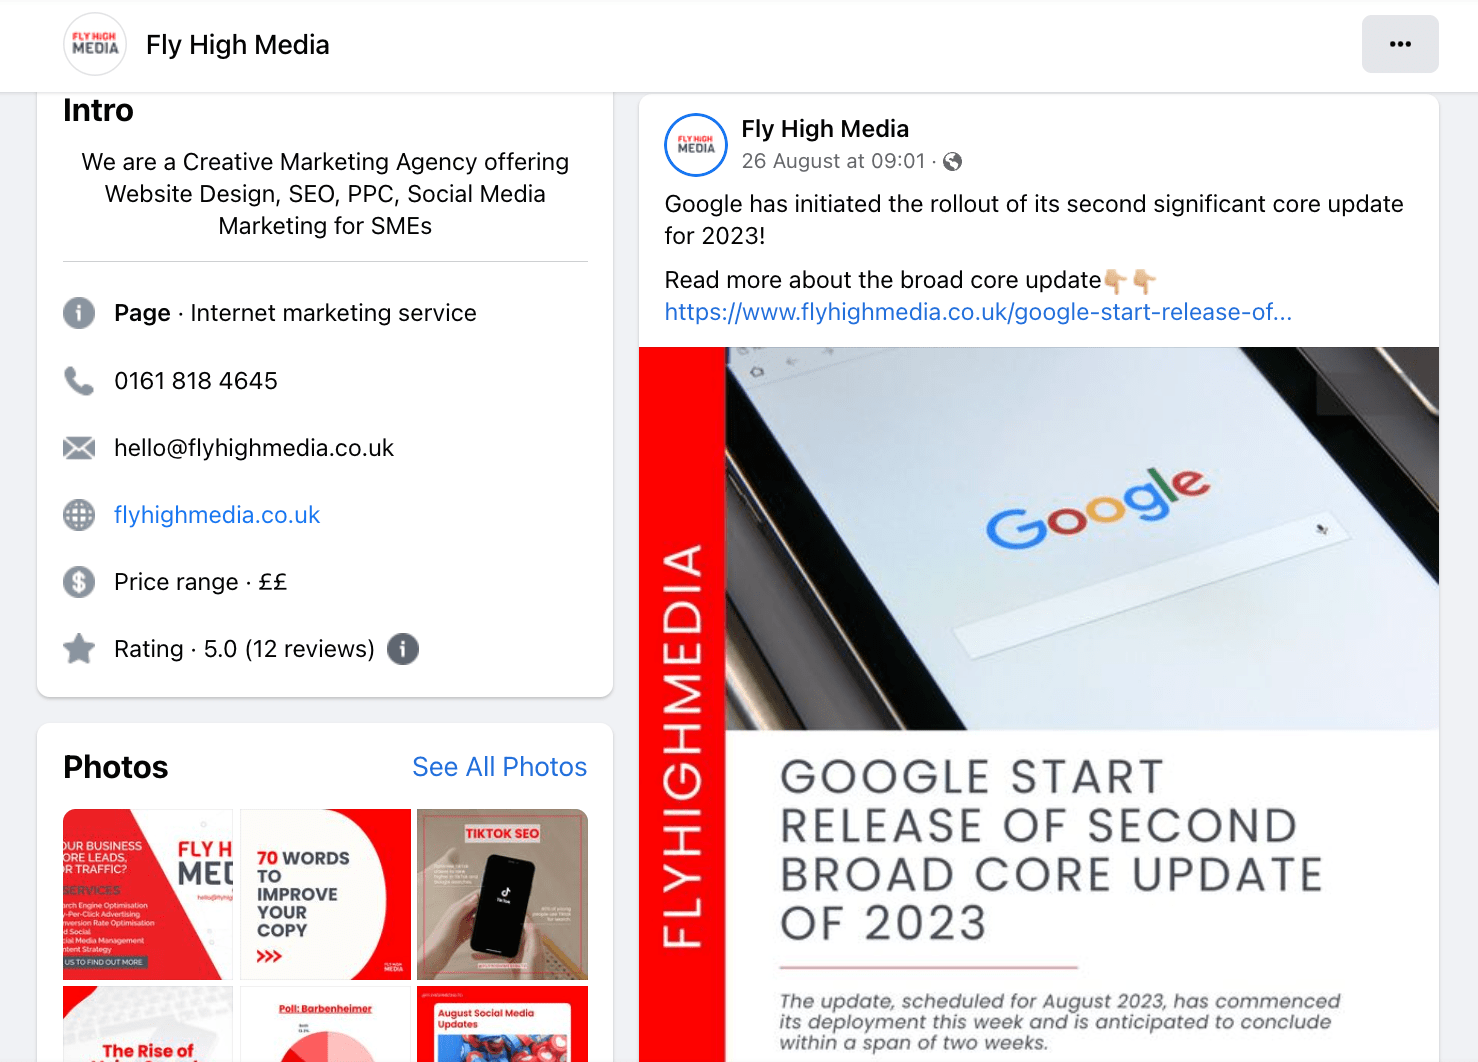 Fly High Media Facebook Post about the second broad core Google update 2023